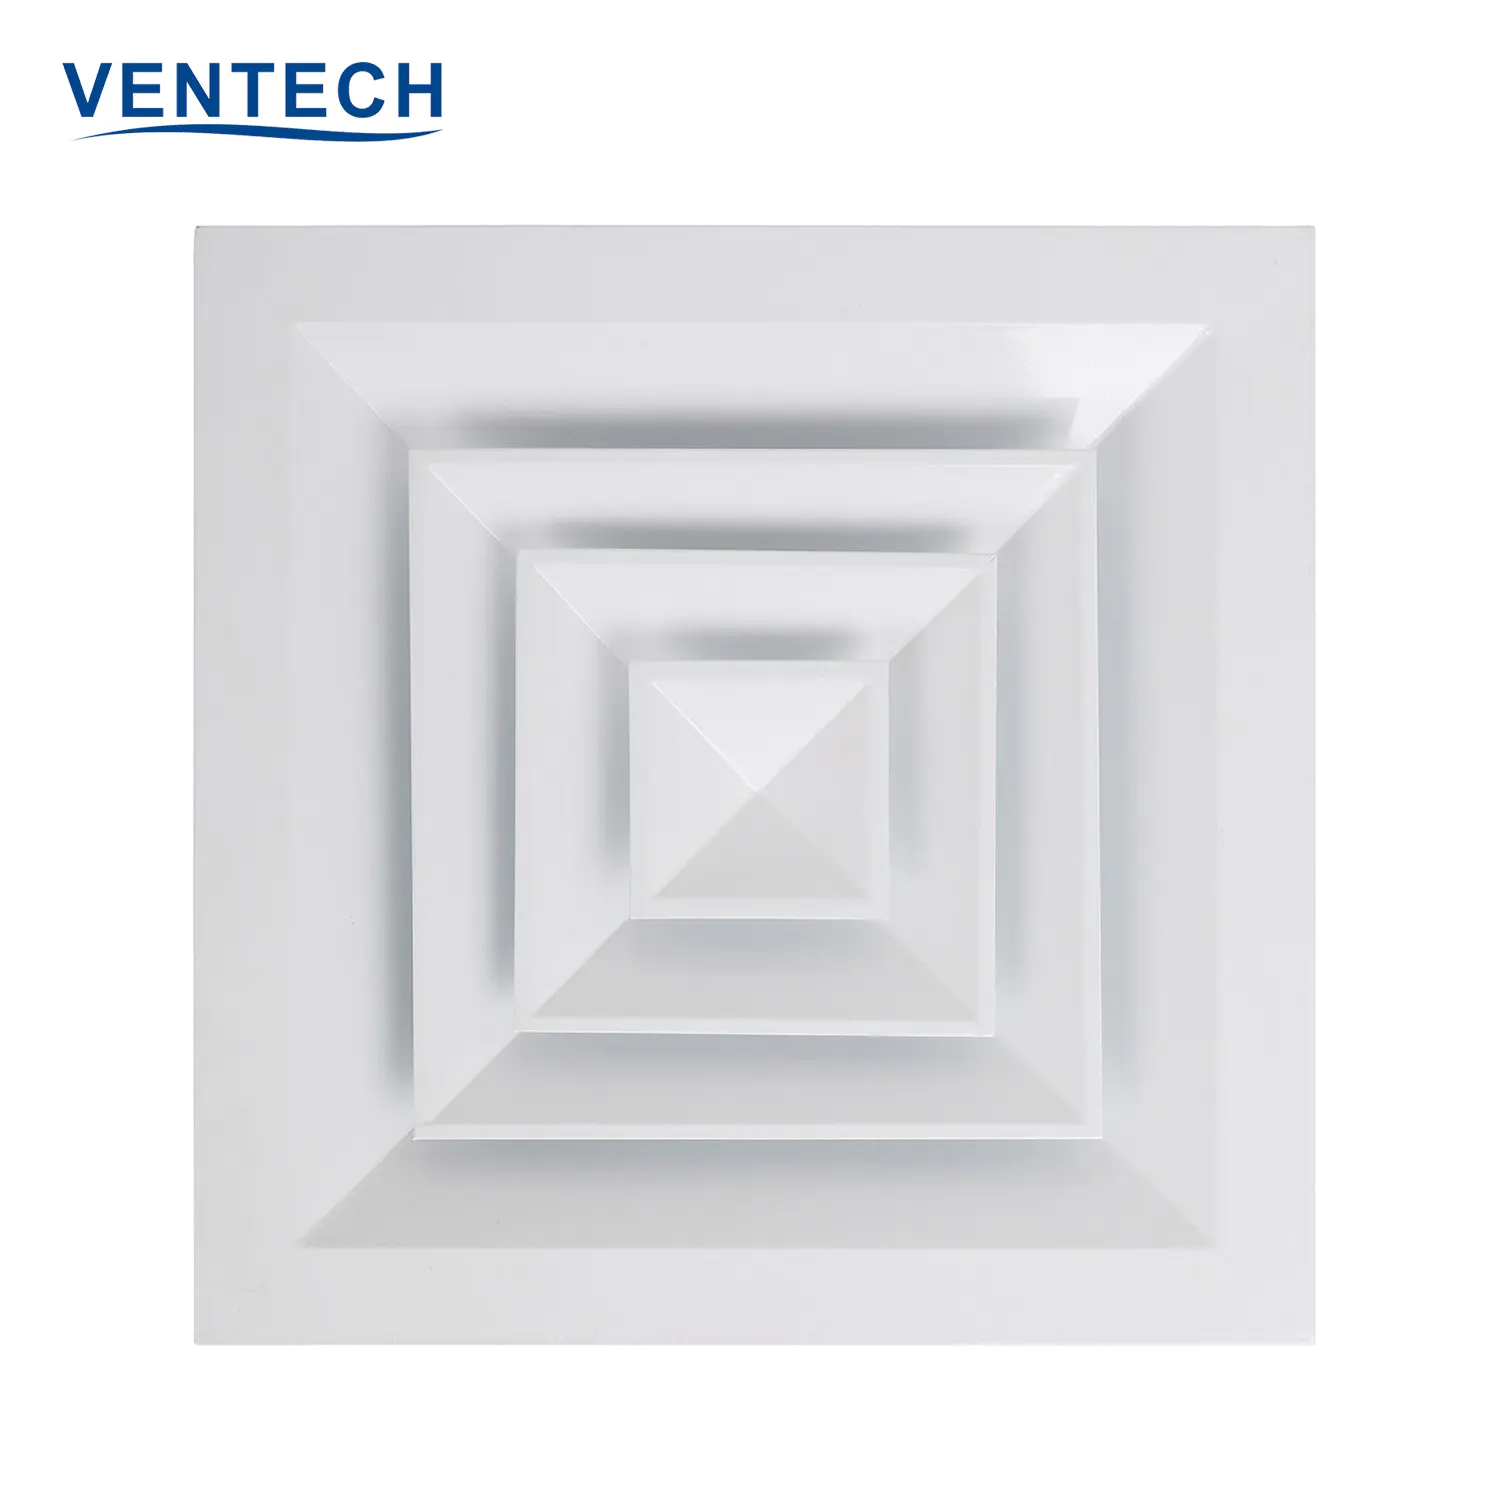 VENTECH Hvac System Aluminum Conditioning Exhaust Square Ceiling Air Duct Outlet Diffusers